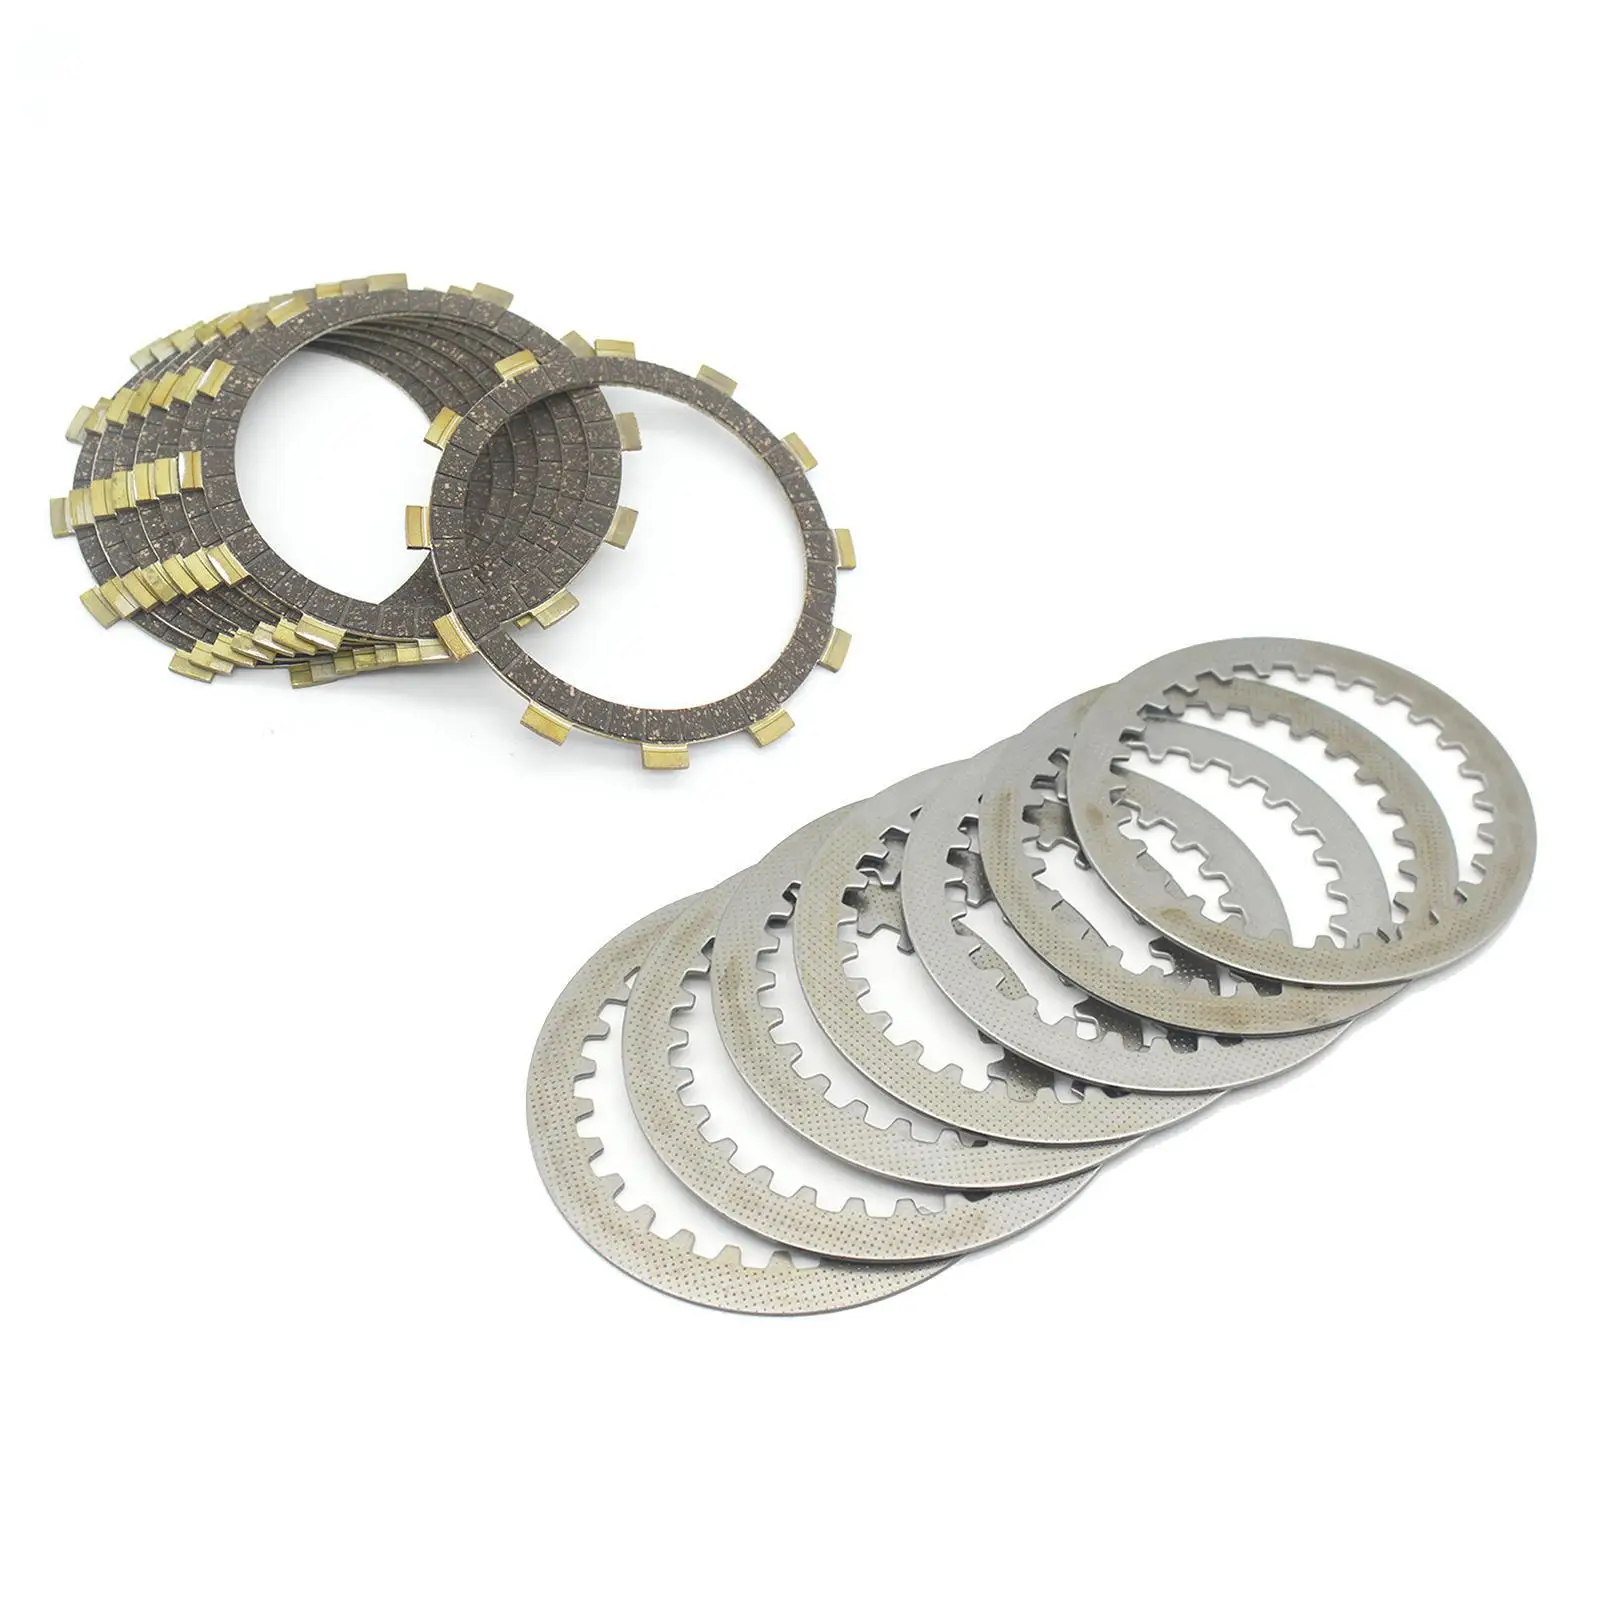 Clutch Friction  for  XJR400 4HM FJ600 XJ650 Motocross ATV  Outdoor Engine Cooling 4H7-1631 168-16325-00